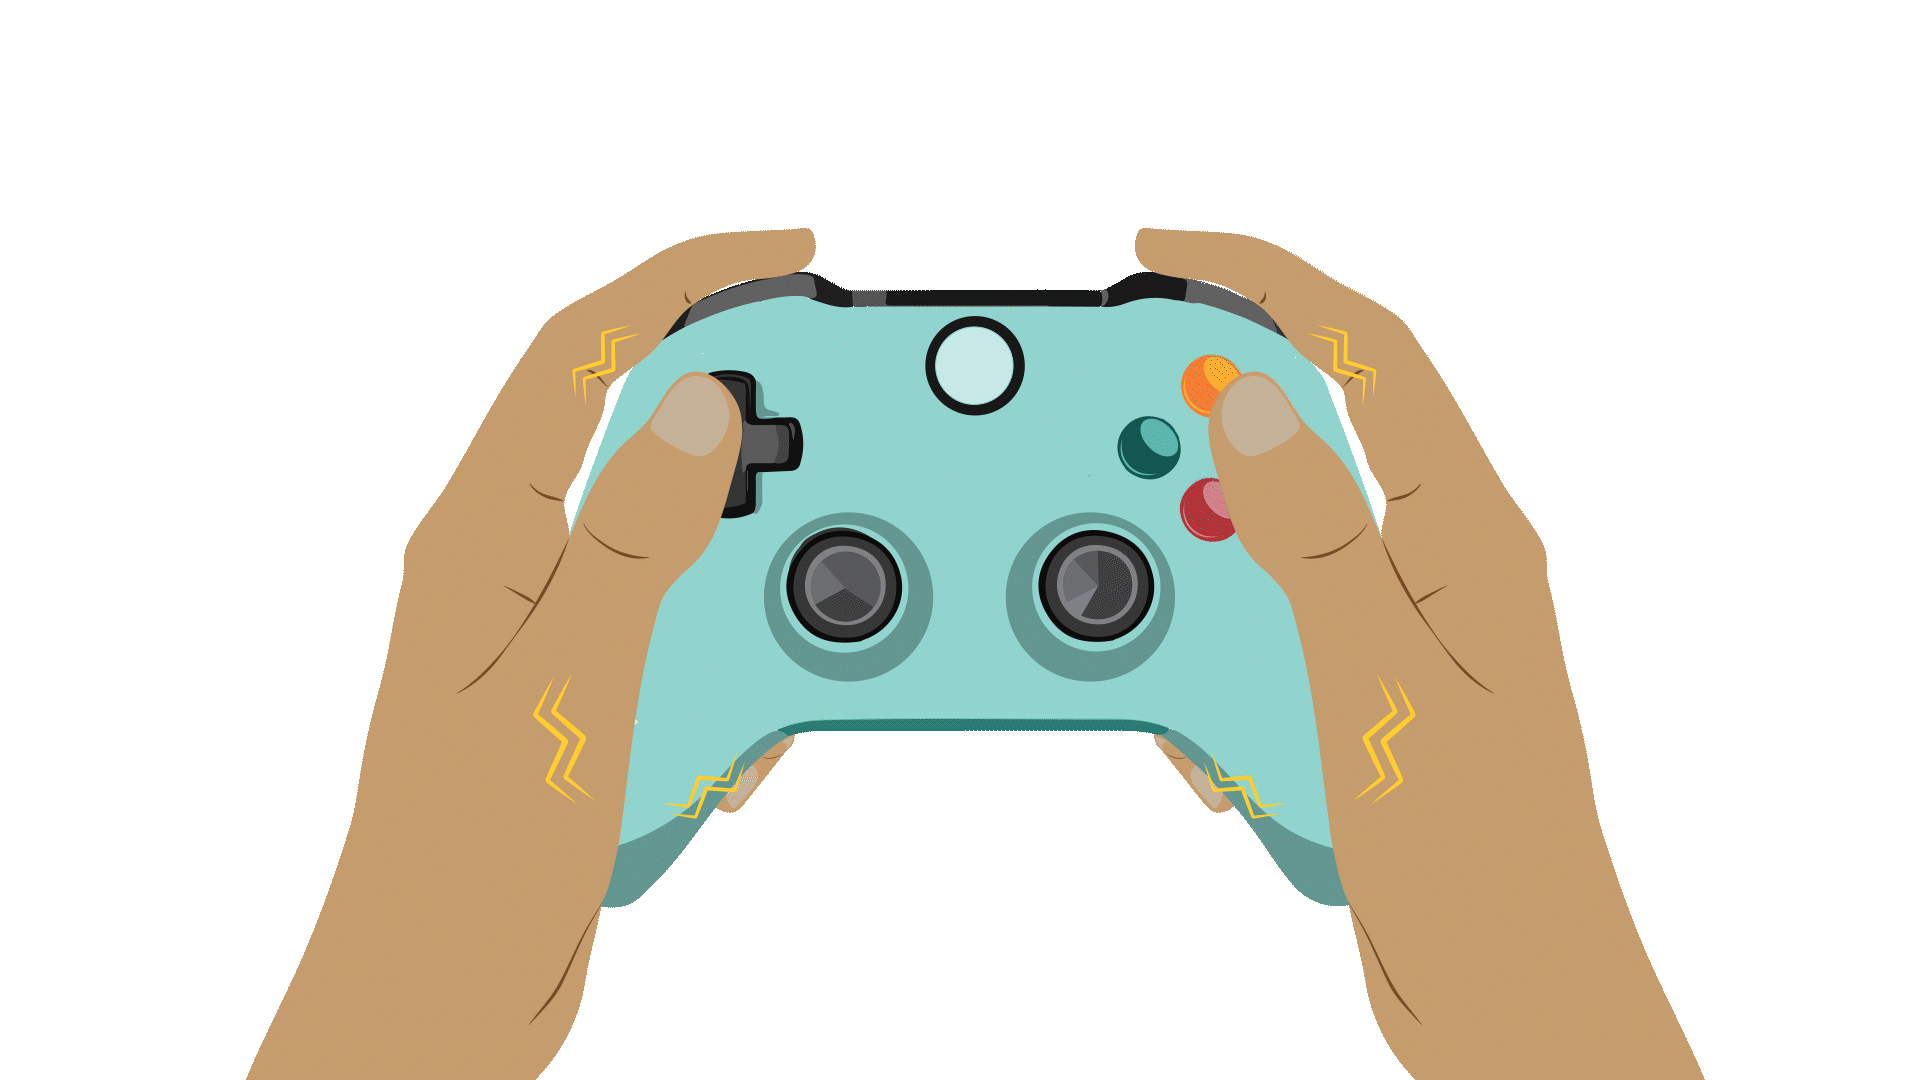 Two hands hold a teal game controller. Yellow squiggly lines vibrate from the controller.